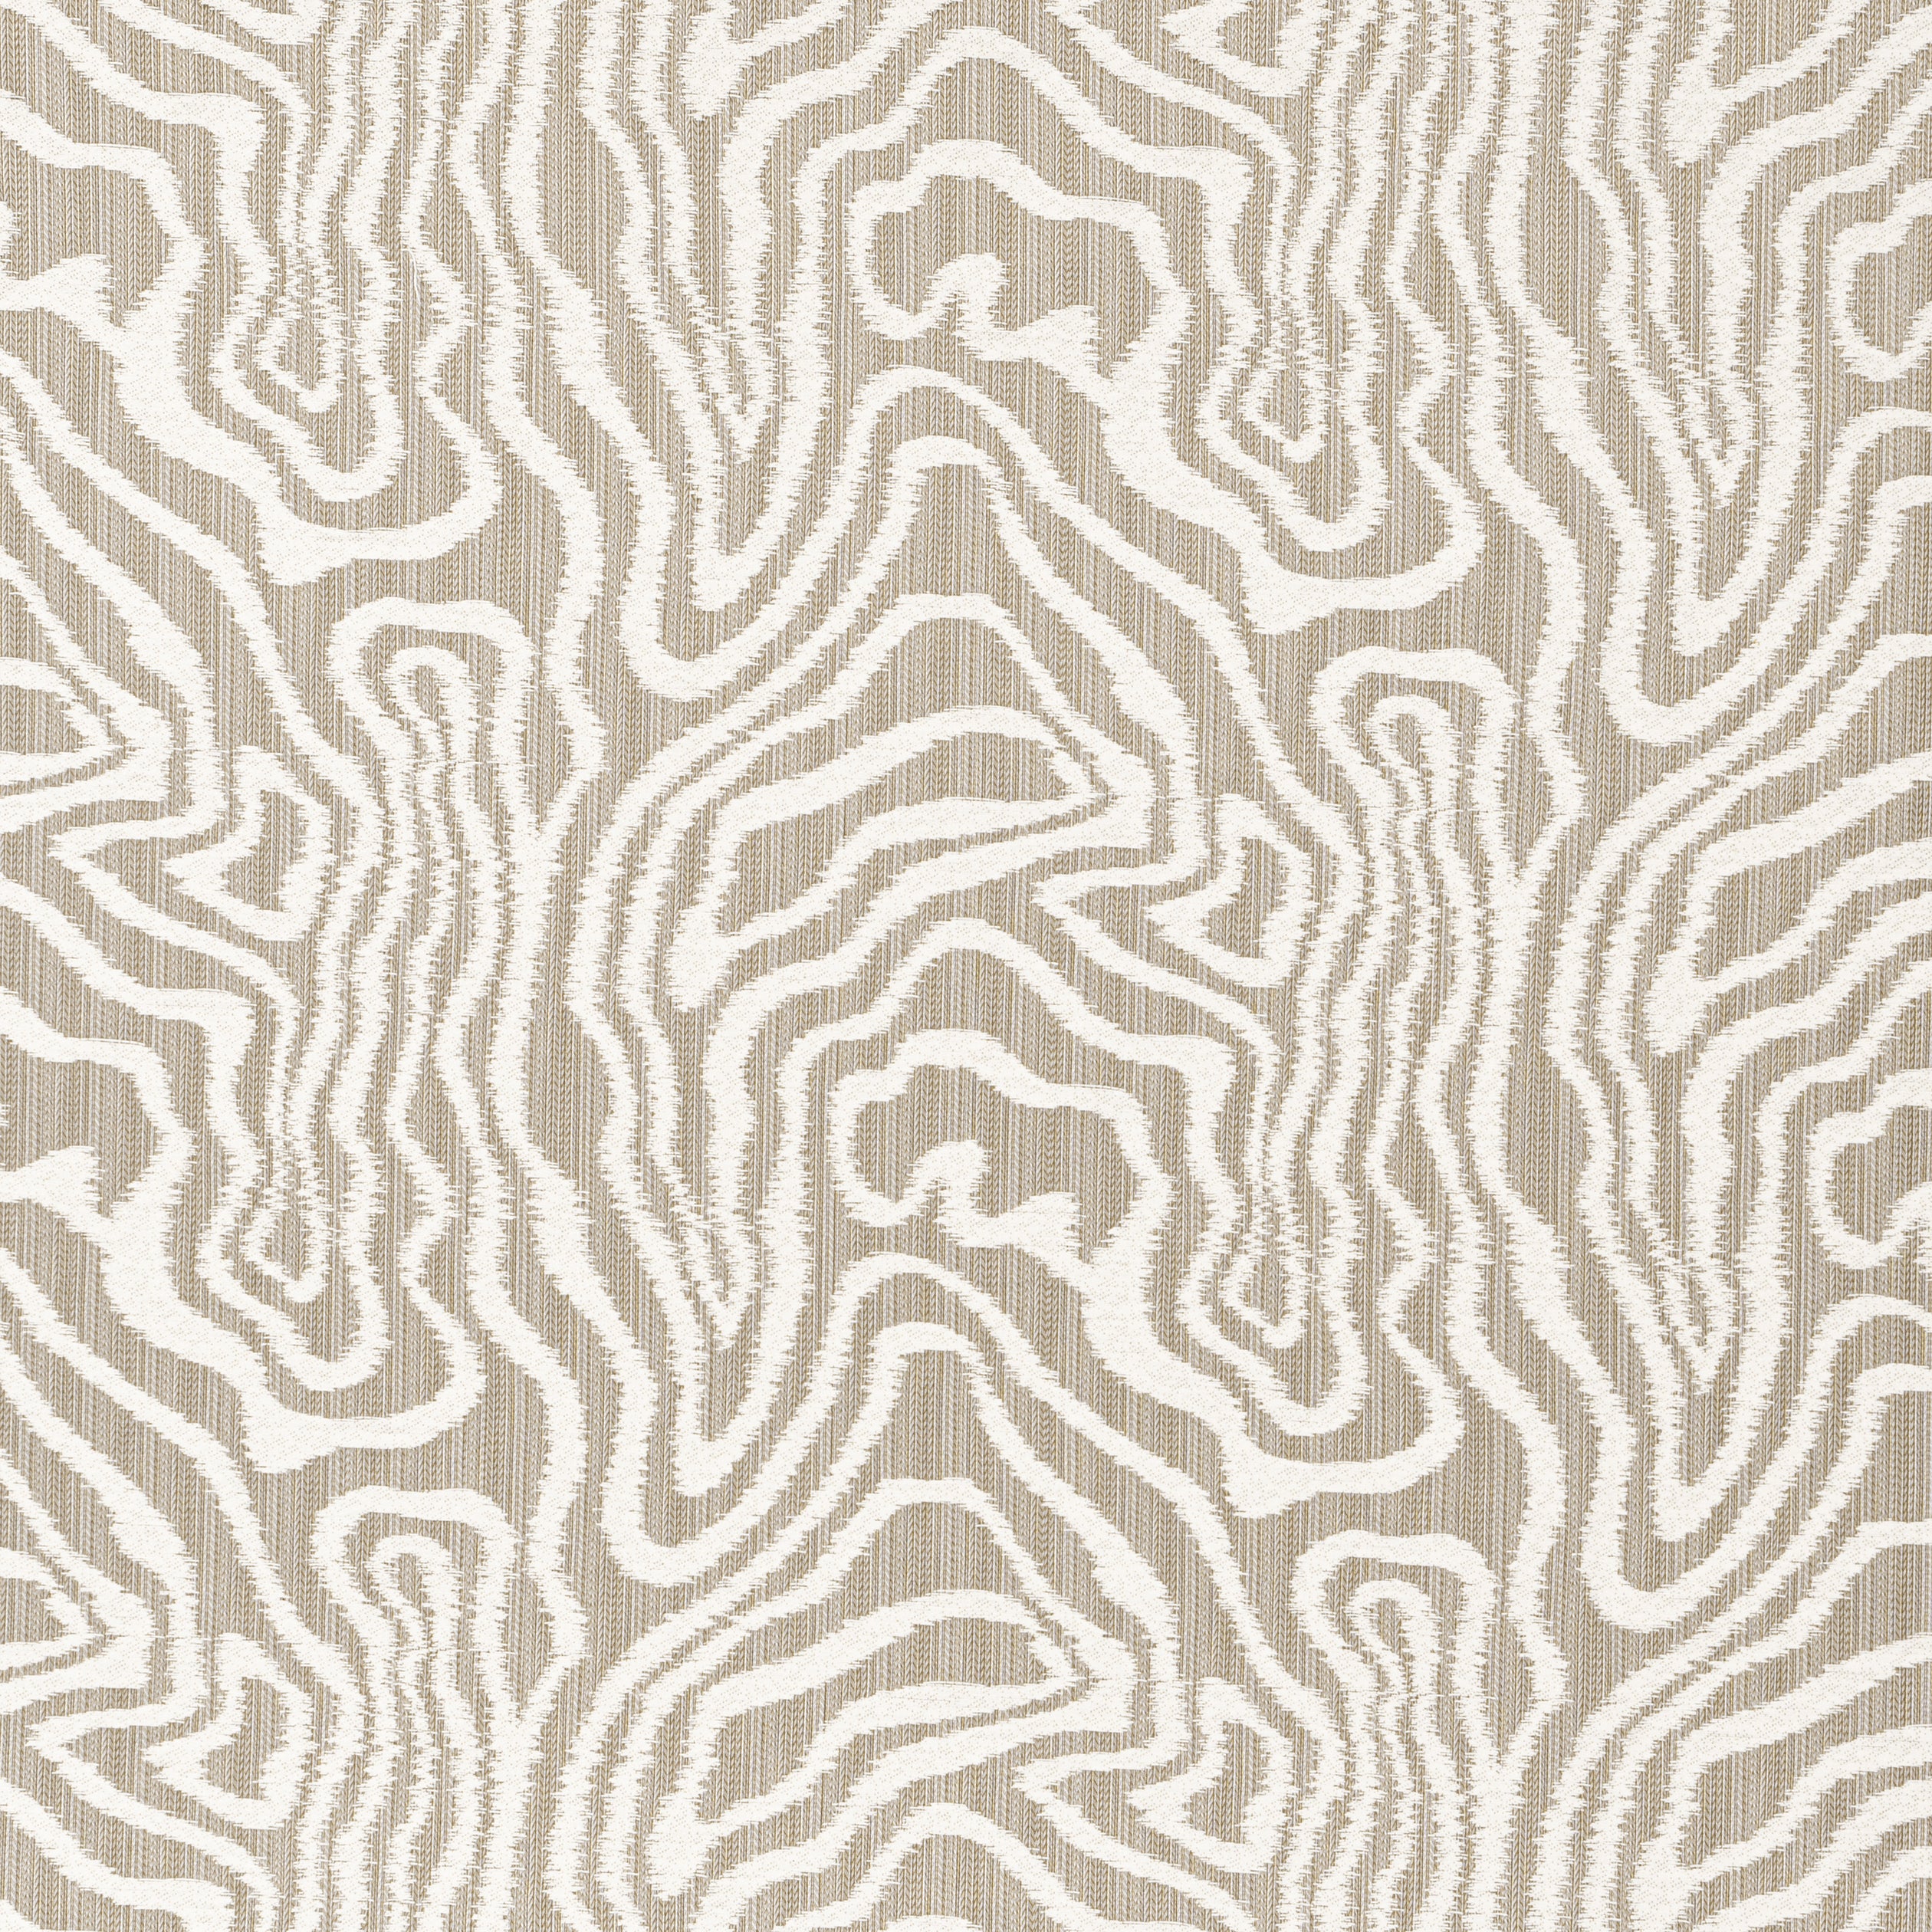 Alessandro fabric in taupe - pattern number W713612 - by Thibaut in the Grand Palace collection